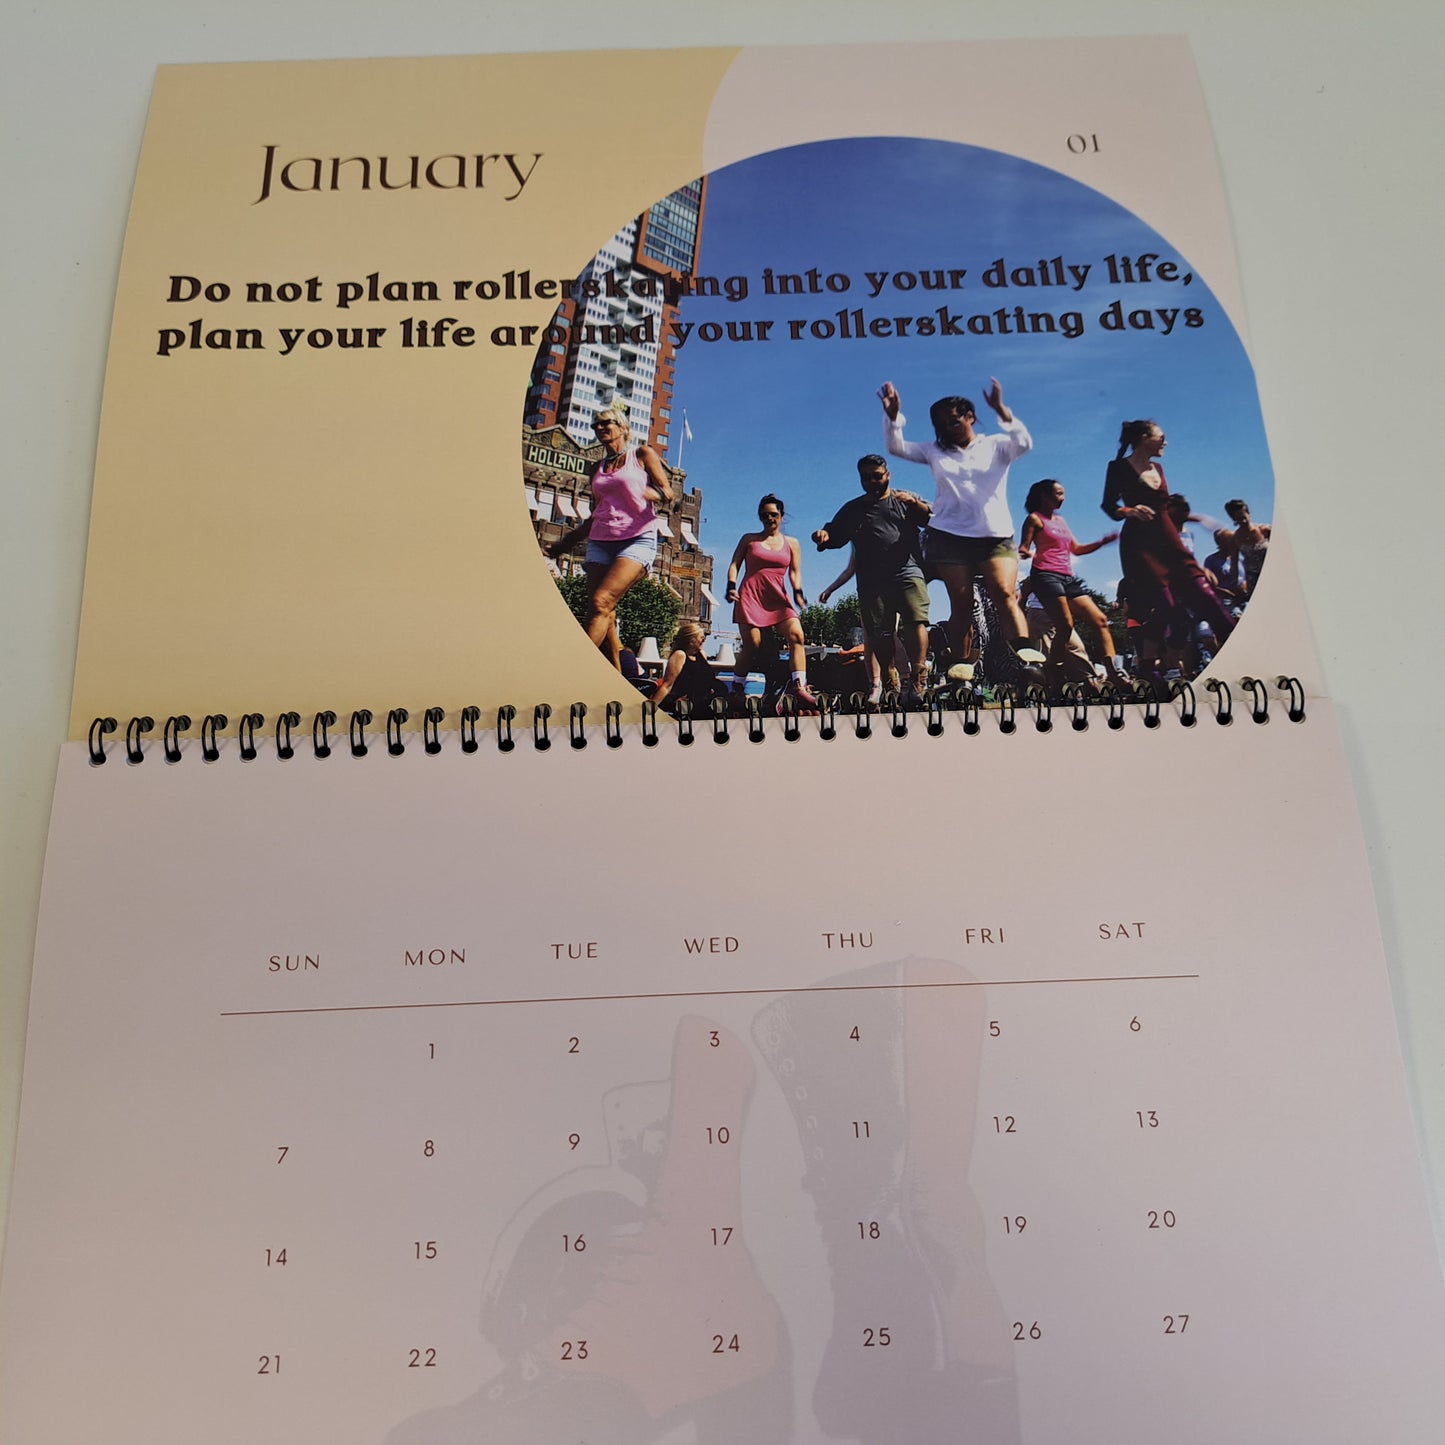 Soulful Journey ( year) Planner 2024